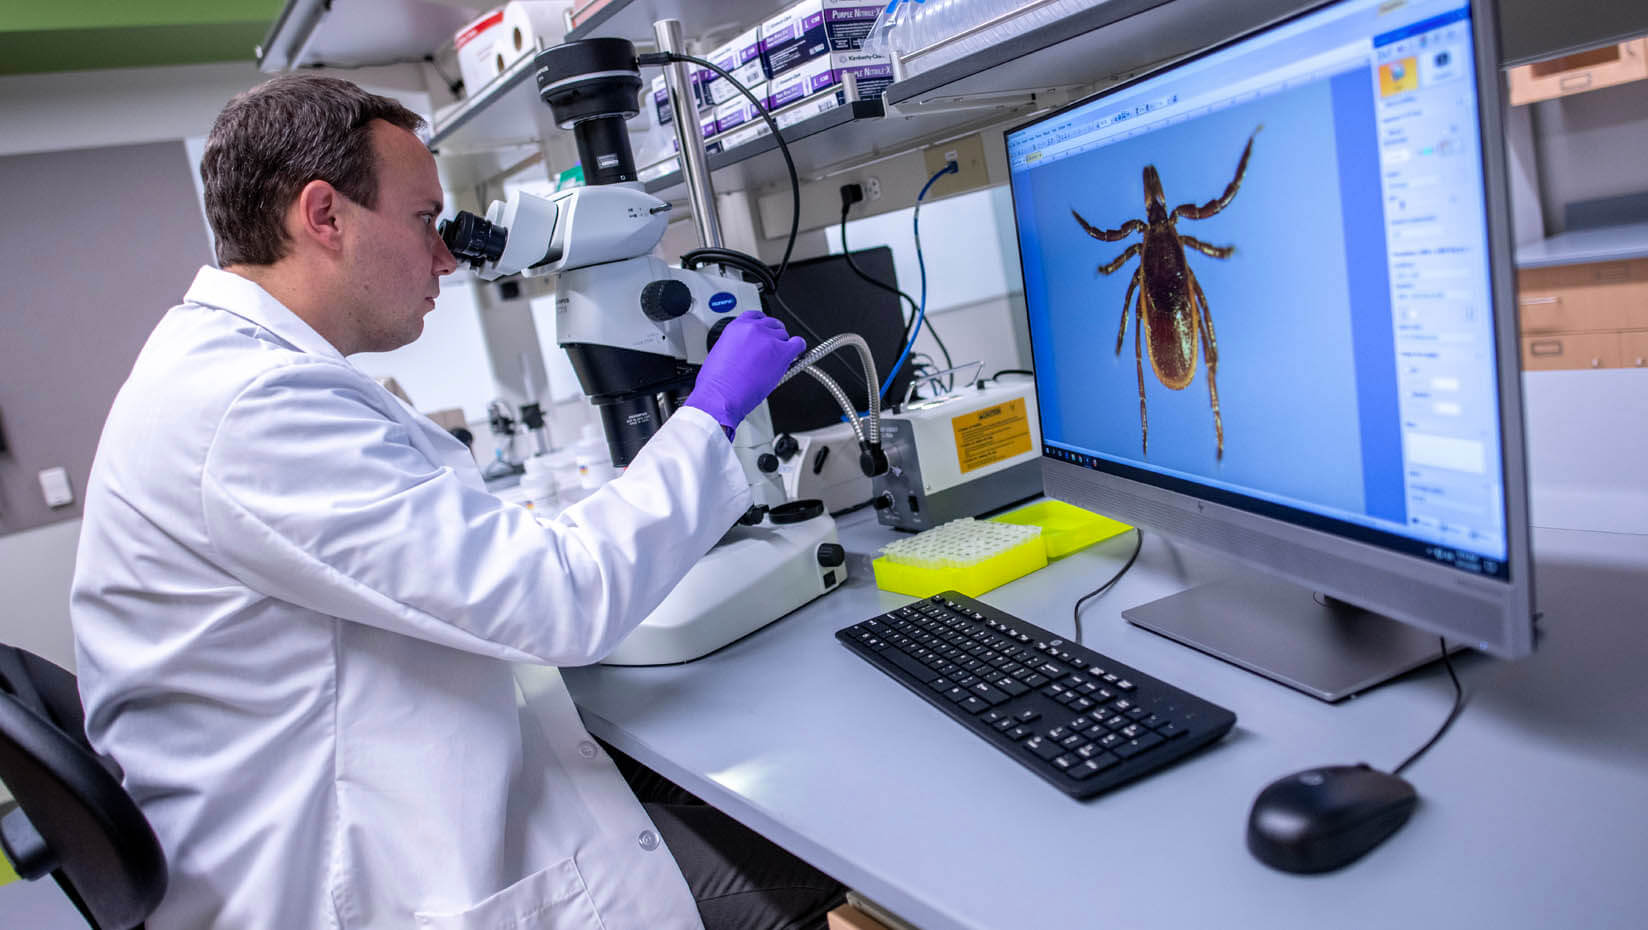 A photo of a person conducing tick research in a lab